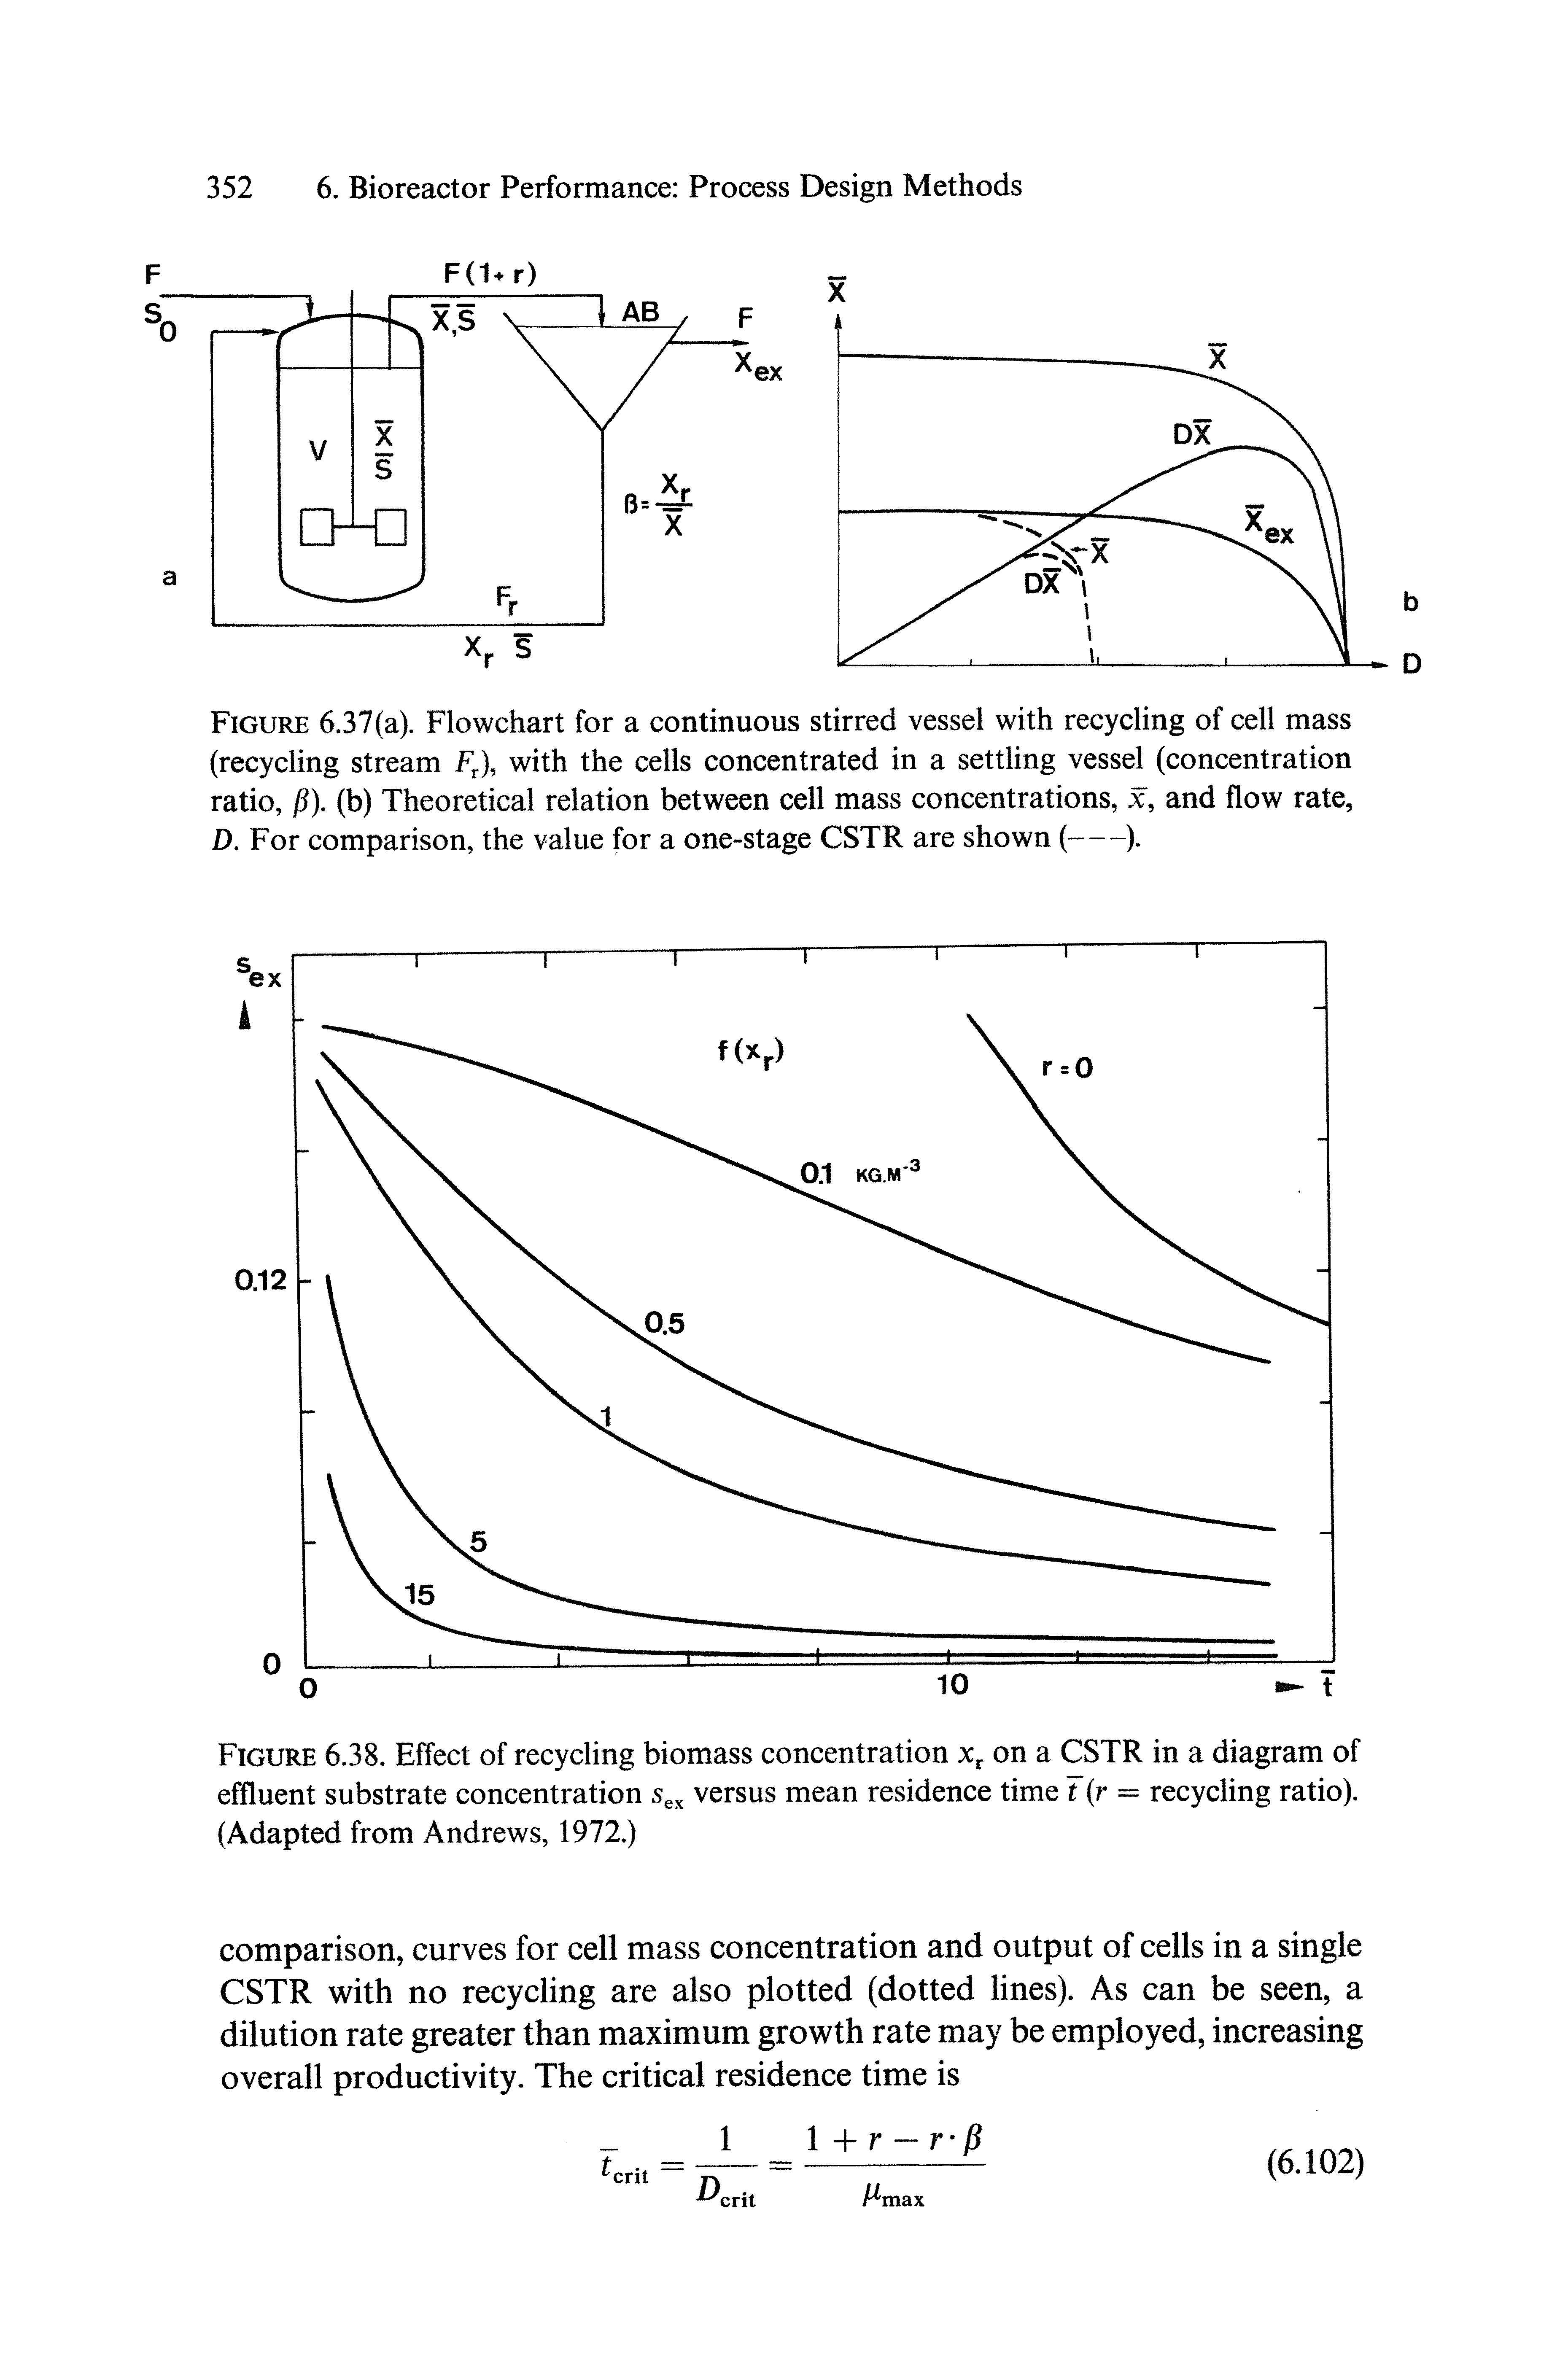 Figure 6.38. Effect of recycling biomass concentration x. on a CSTR in a diagram of effluent substrate concentration versus mean residence time F(r = recycling ratio). (Adapted from Andrews, 1972.)...